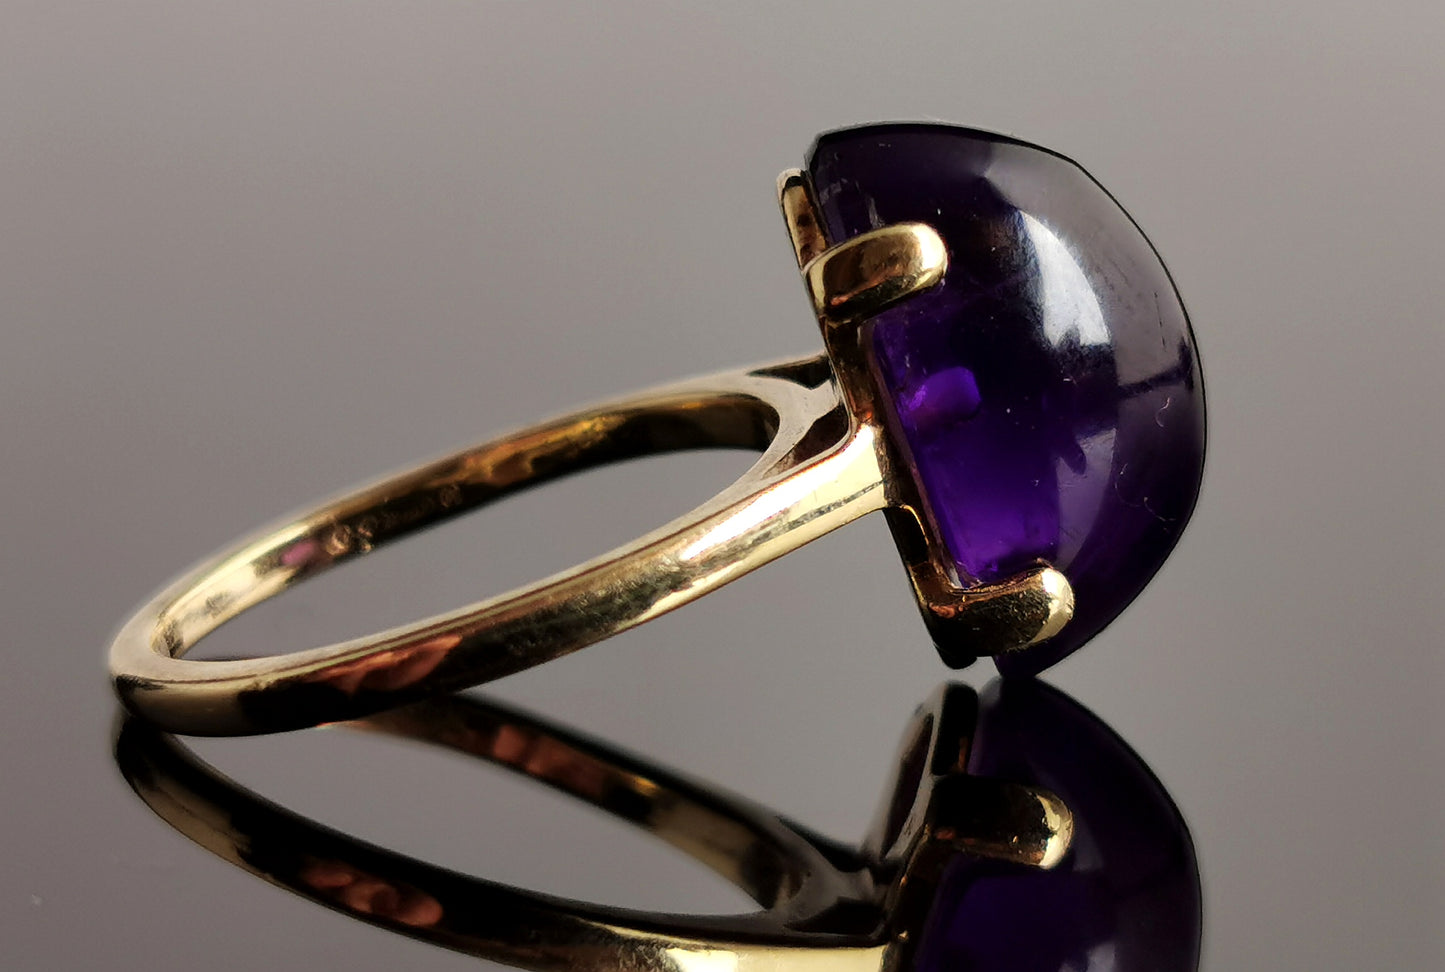 Vintage Amethyst cabochon cocktail ring, 9ct gold, 1970s